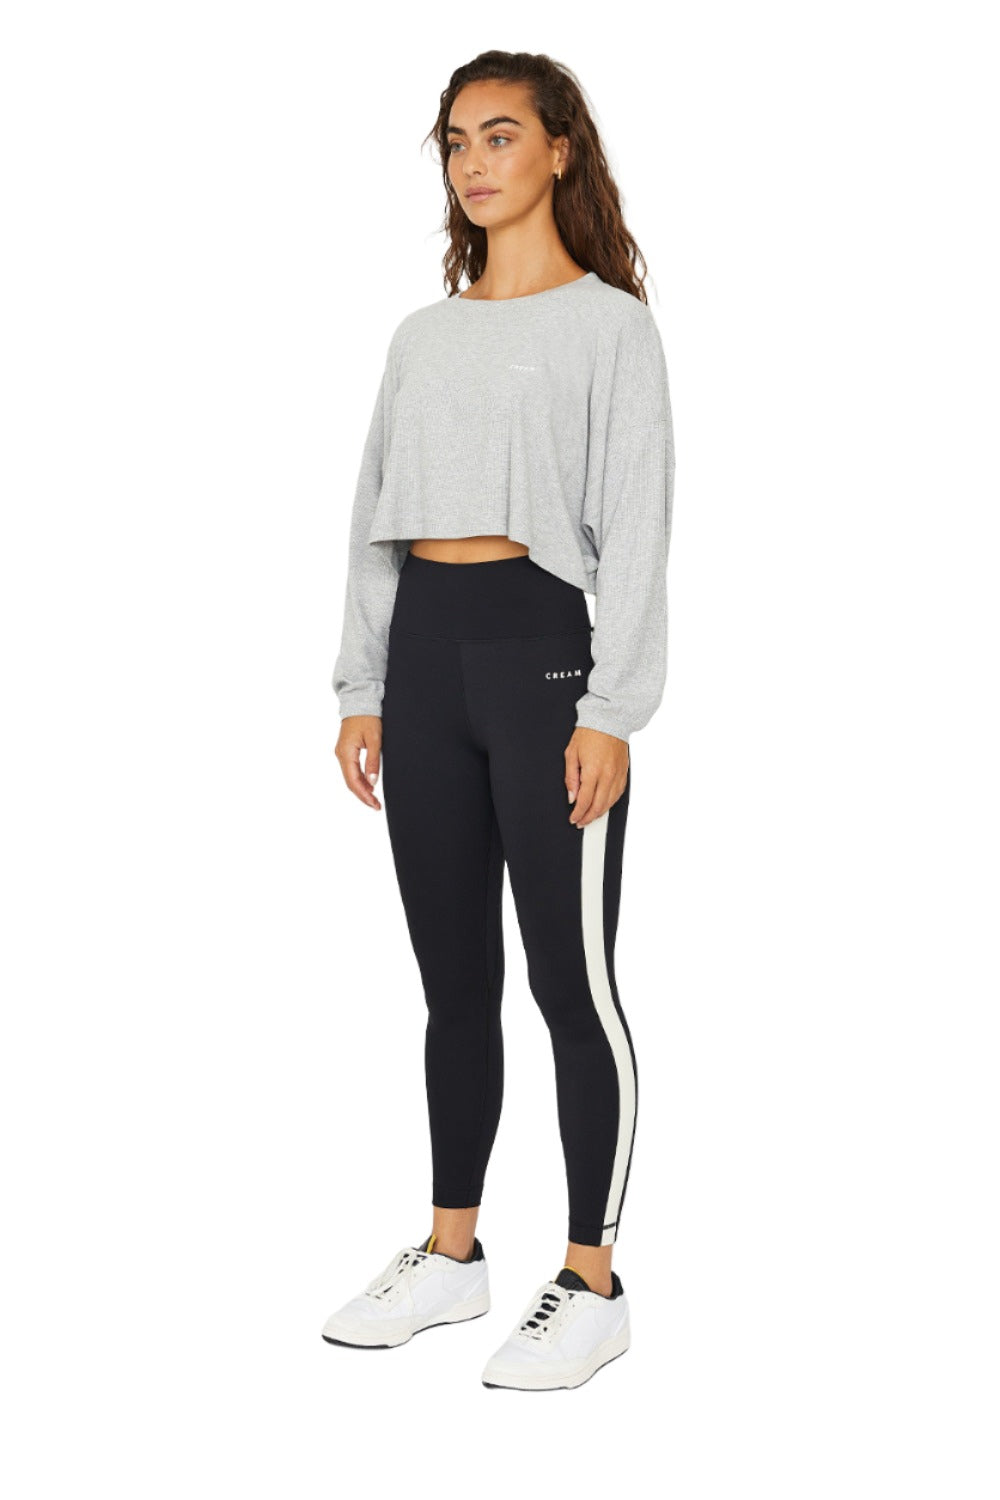 Womens long sleeve active tops